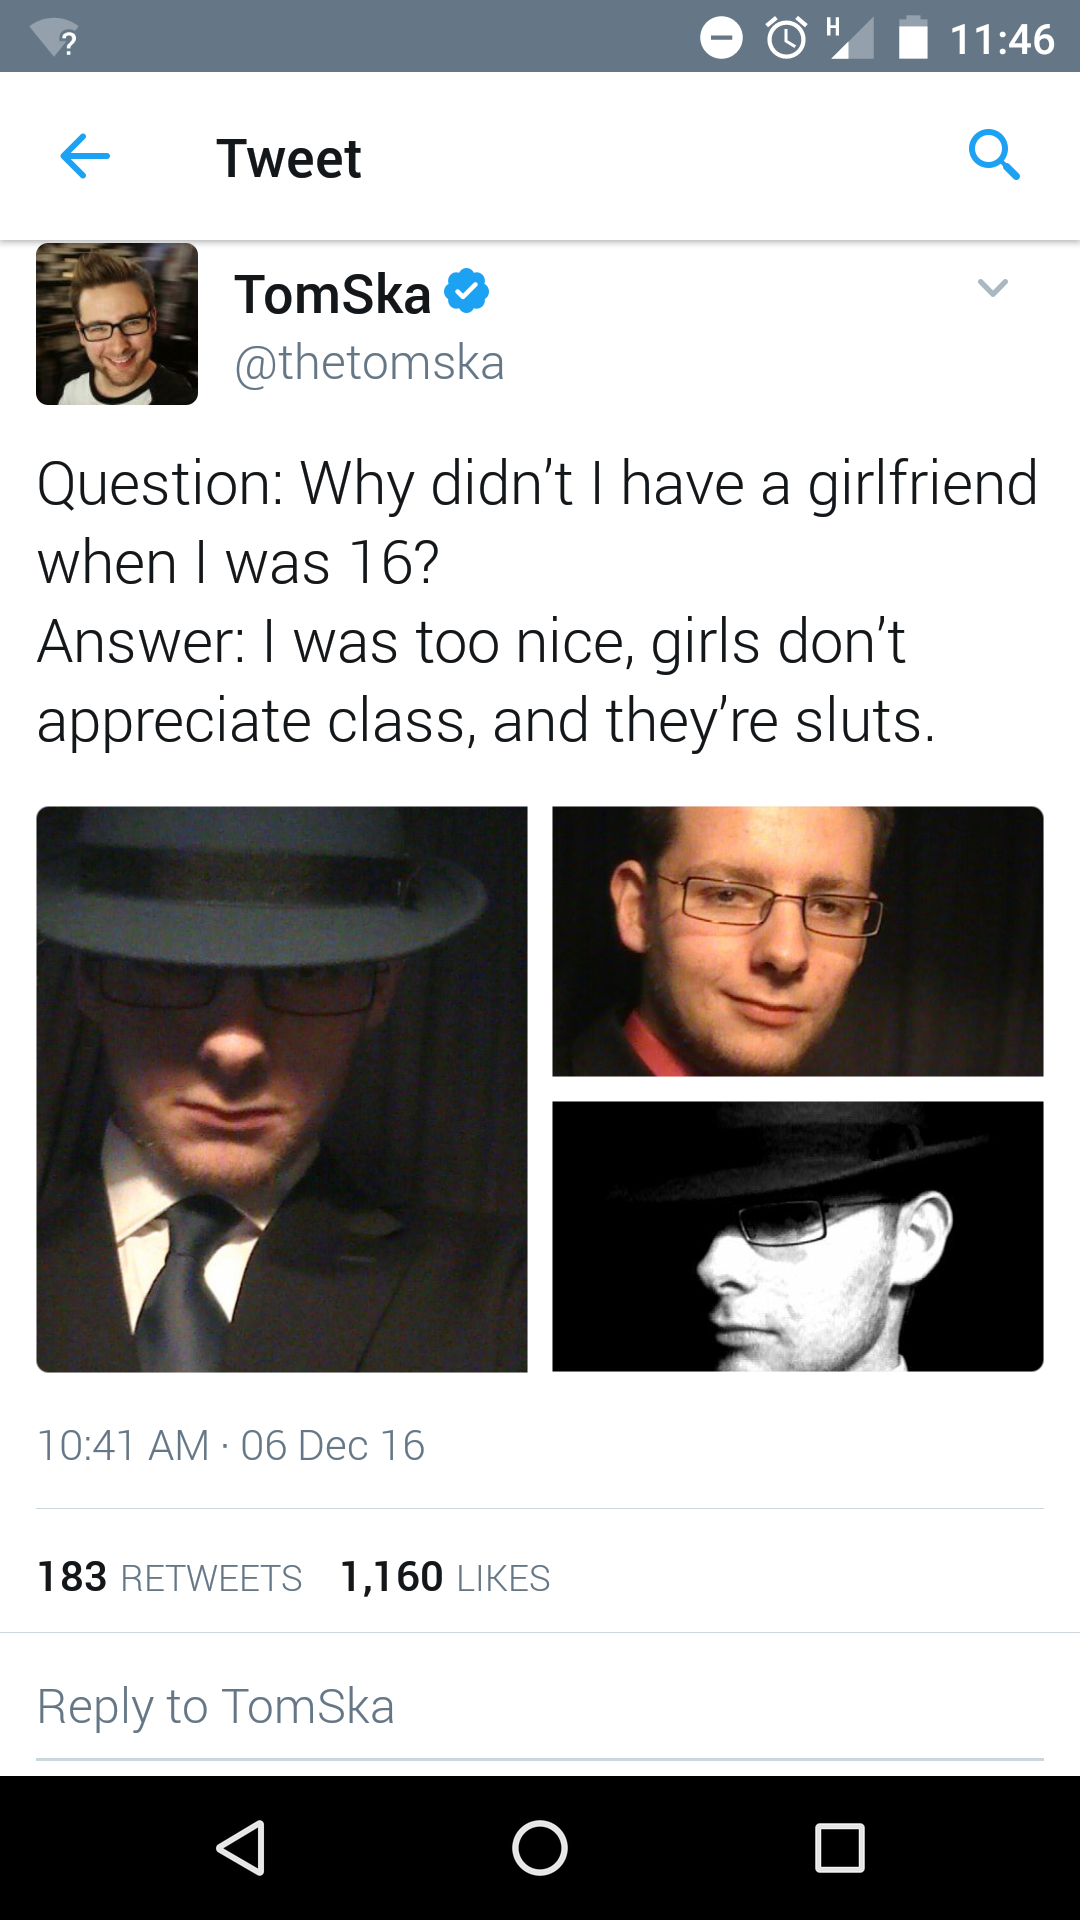 nicegirls cringe - O " Tweet Tom Ska Question Why didn't I have a girlfriend when I was 16? Answer I was too nice, girls don't appreciate class, and they're sluts. 06 Dec 16 183 1,160 to Tomska 0 0 0